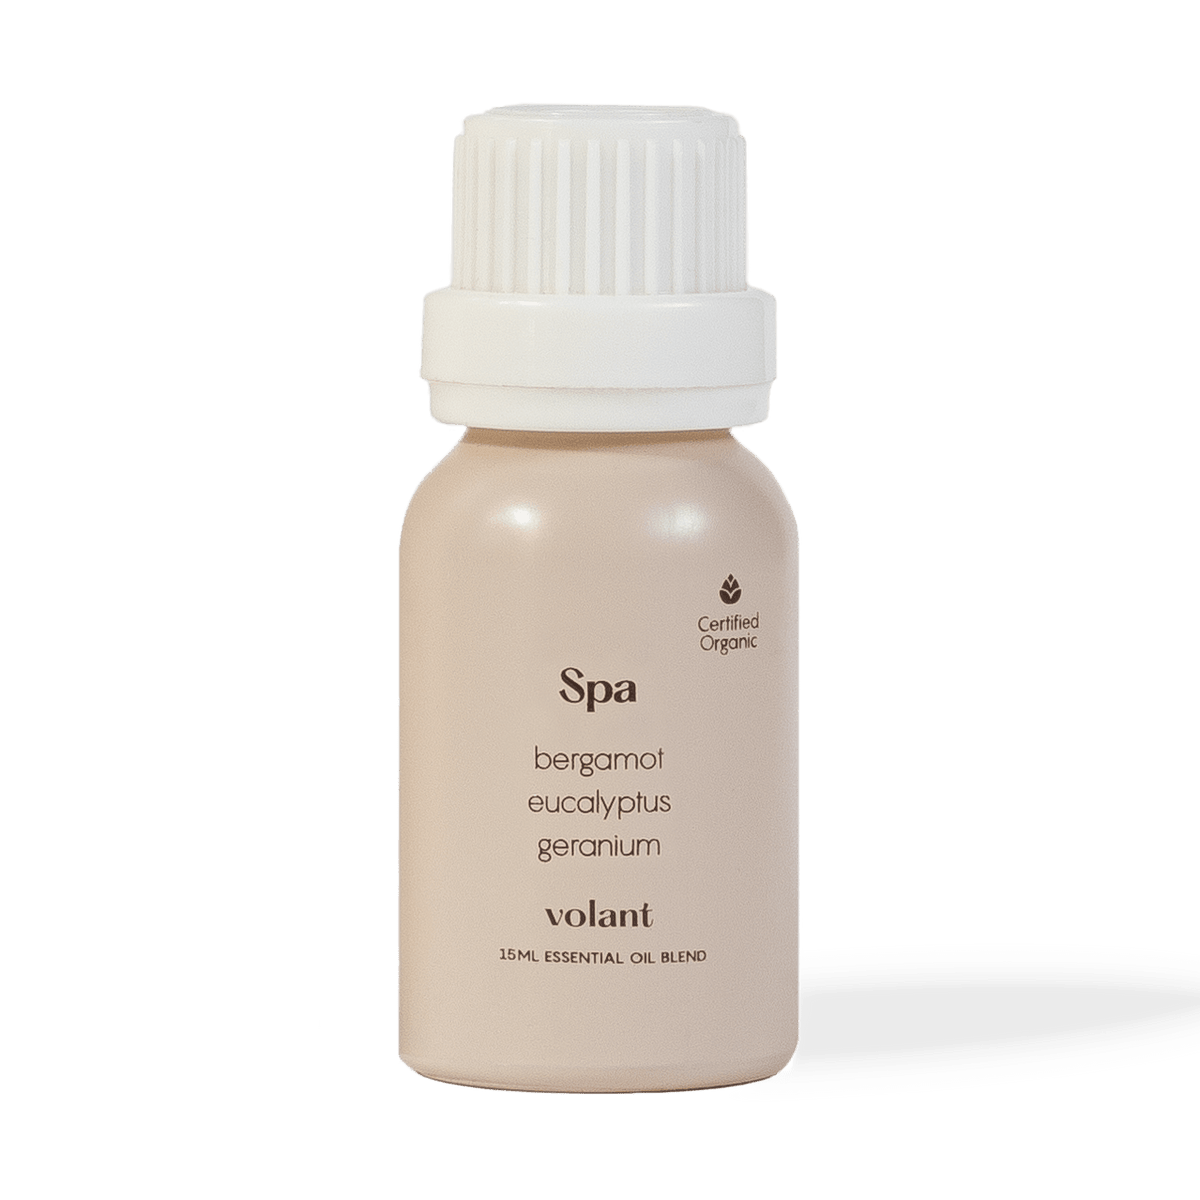 Wipe Out Essential Oil Blend, 15ml